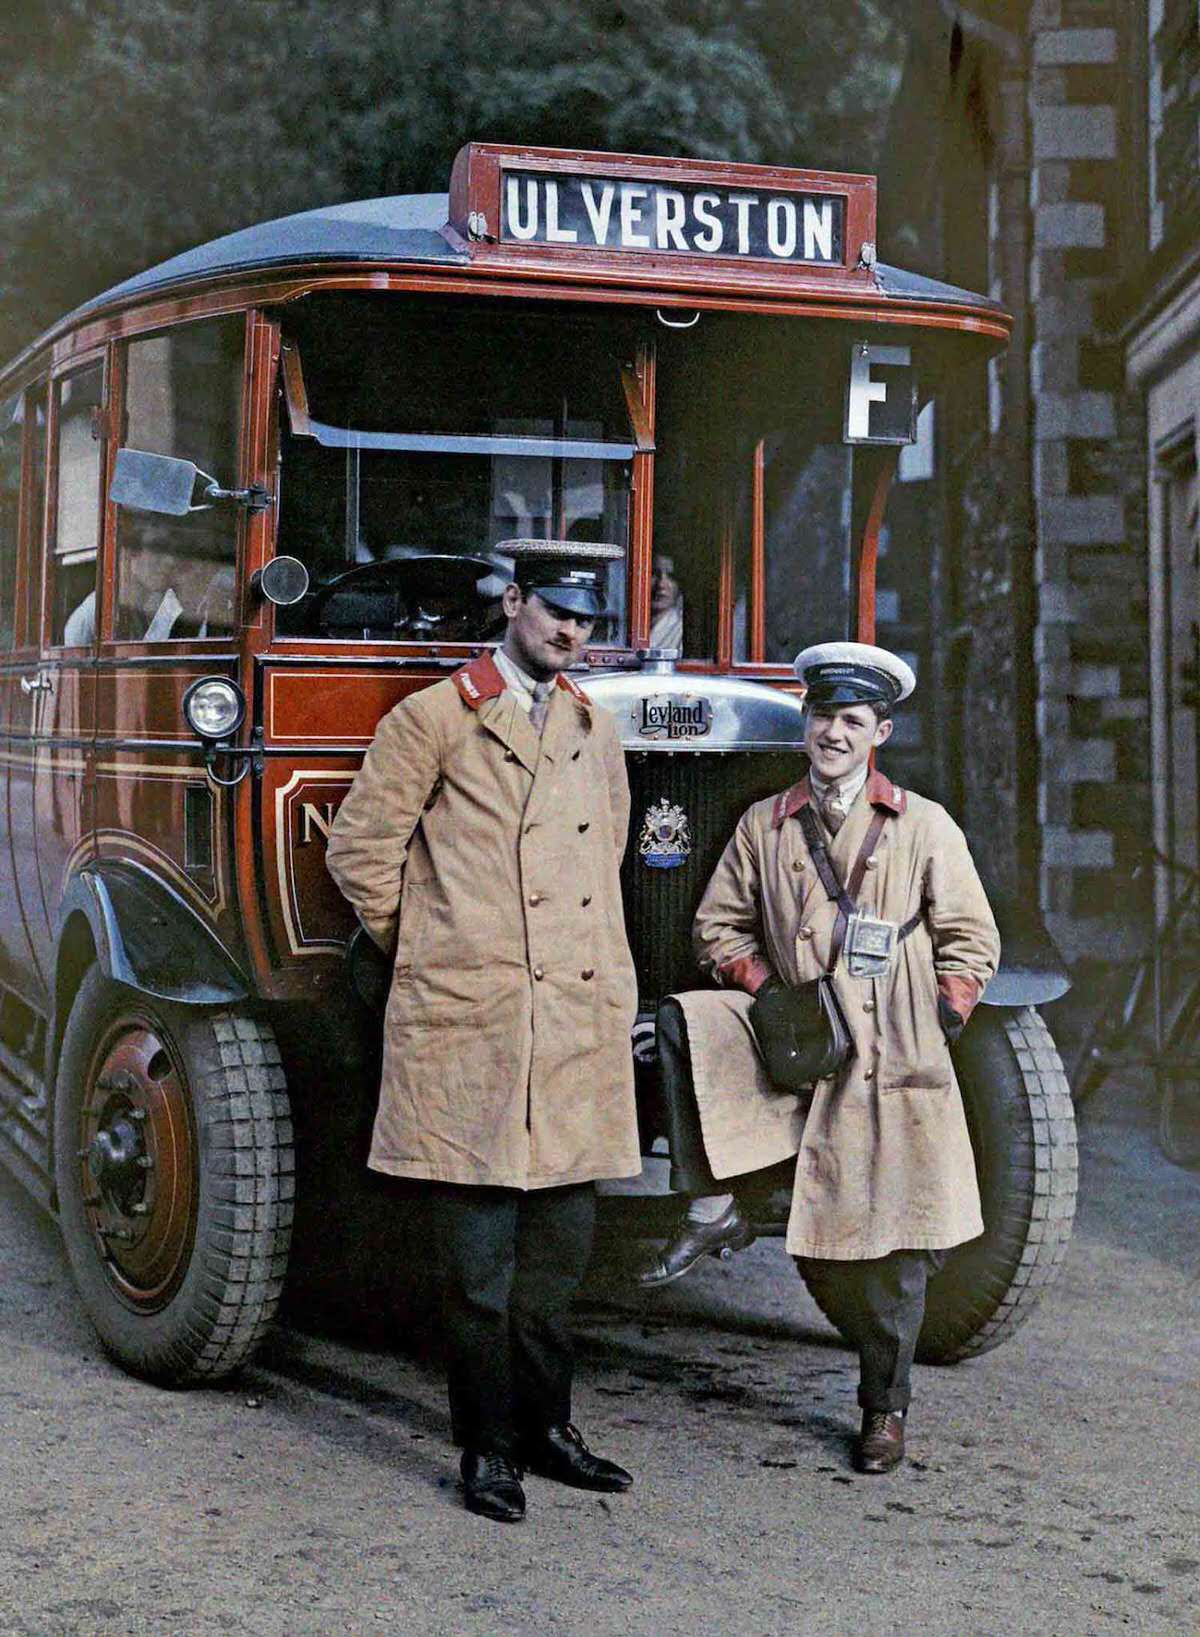 Two bus drivers stand in front of a tour bus in Ulverston, Cumbria.